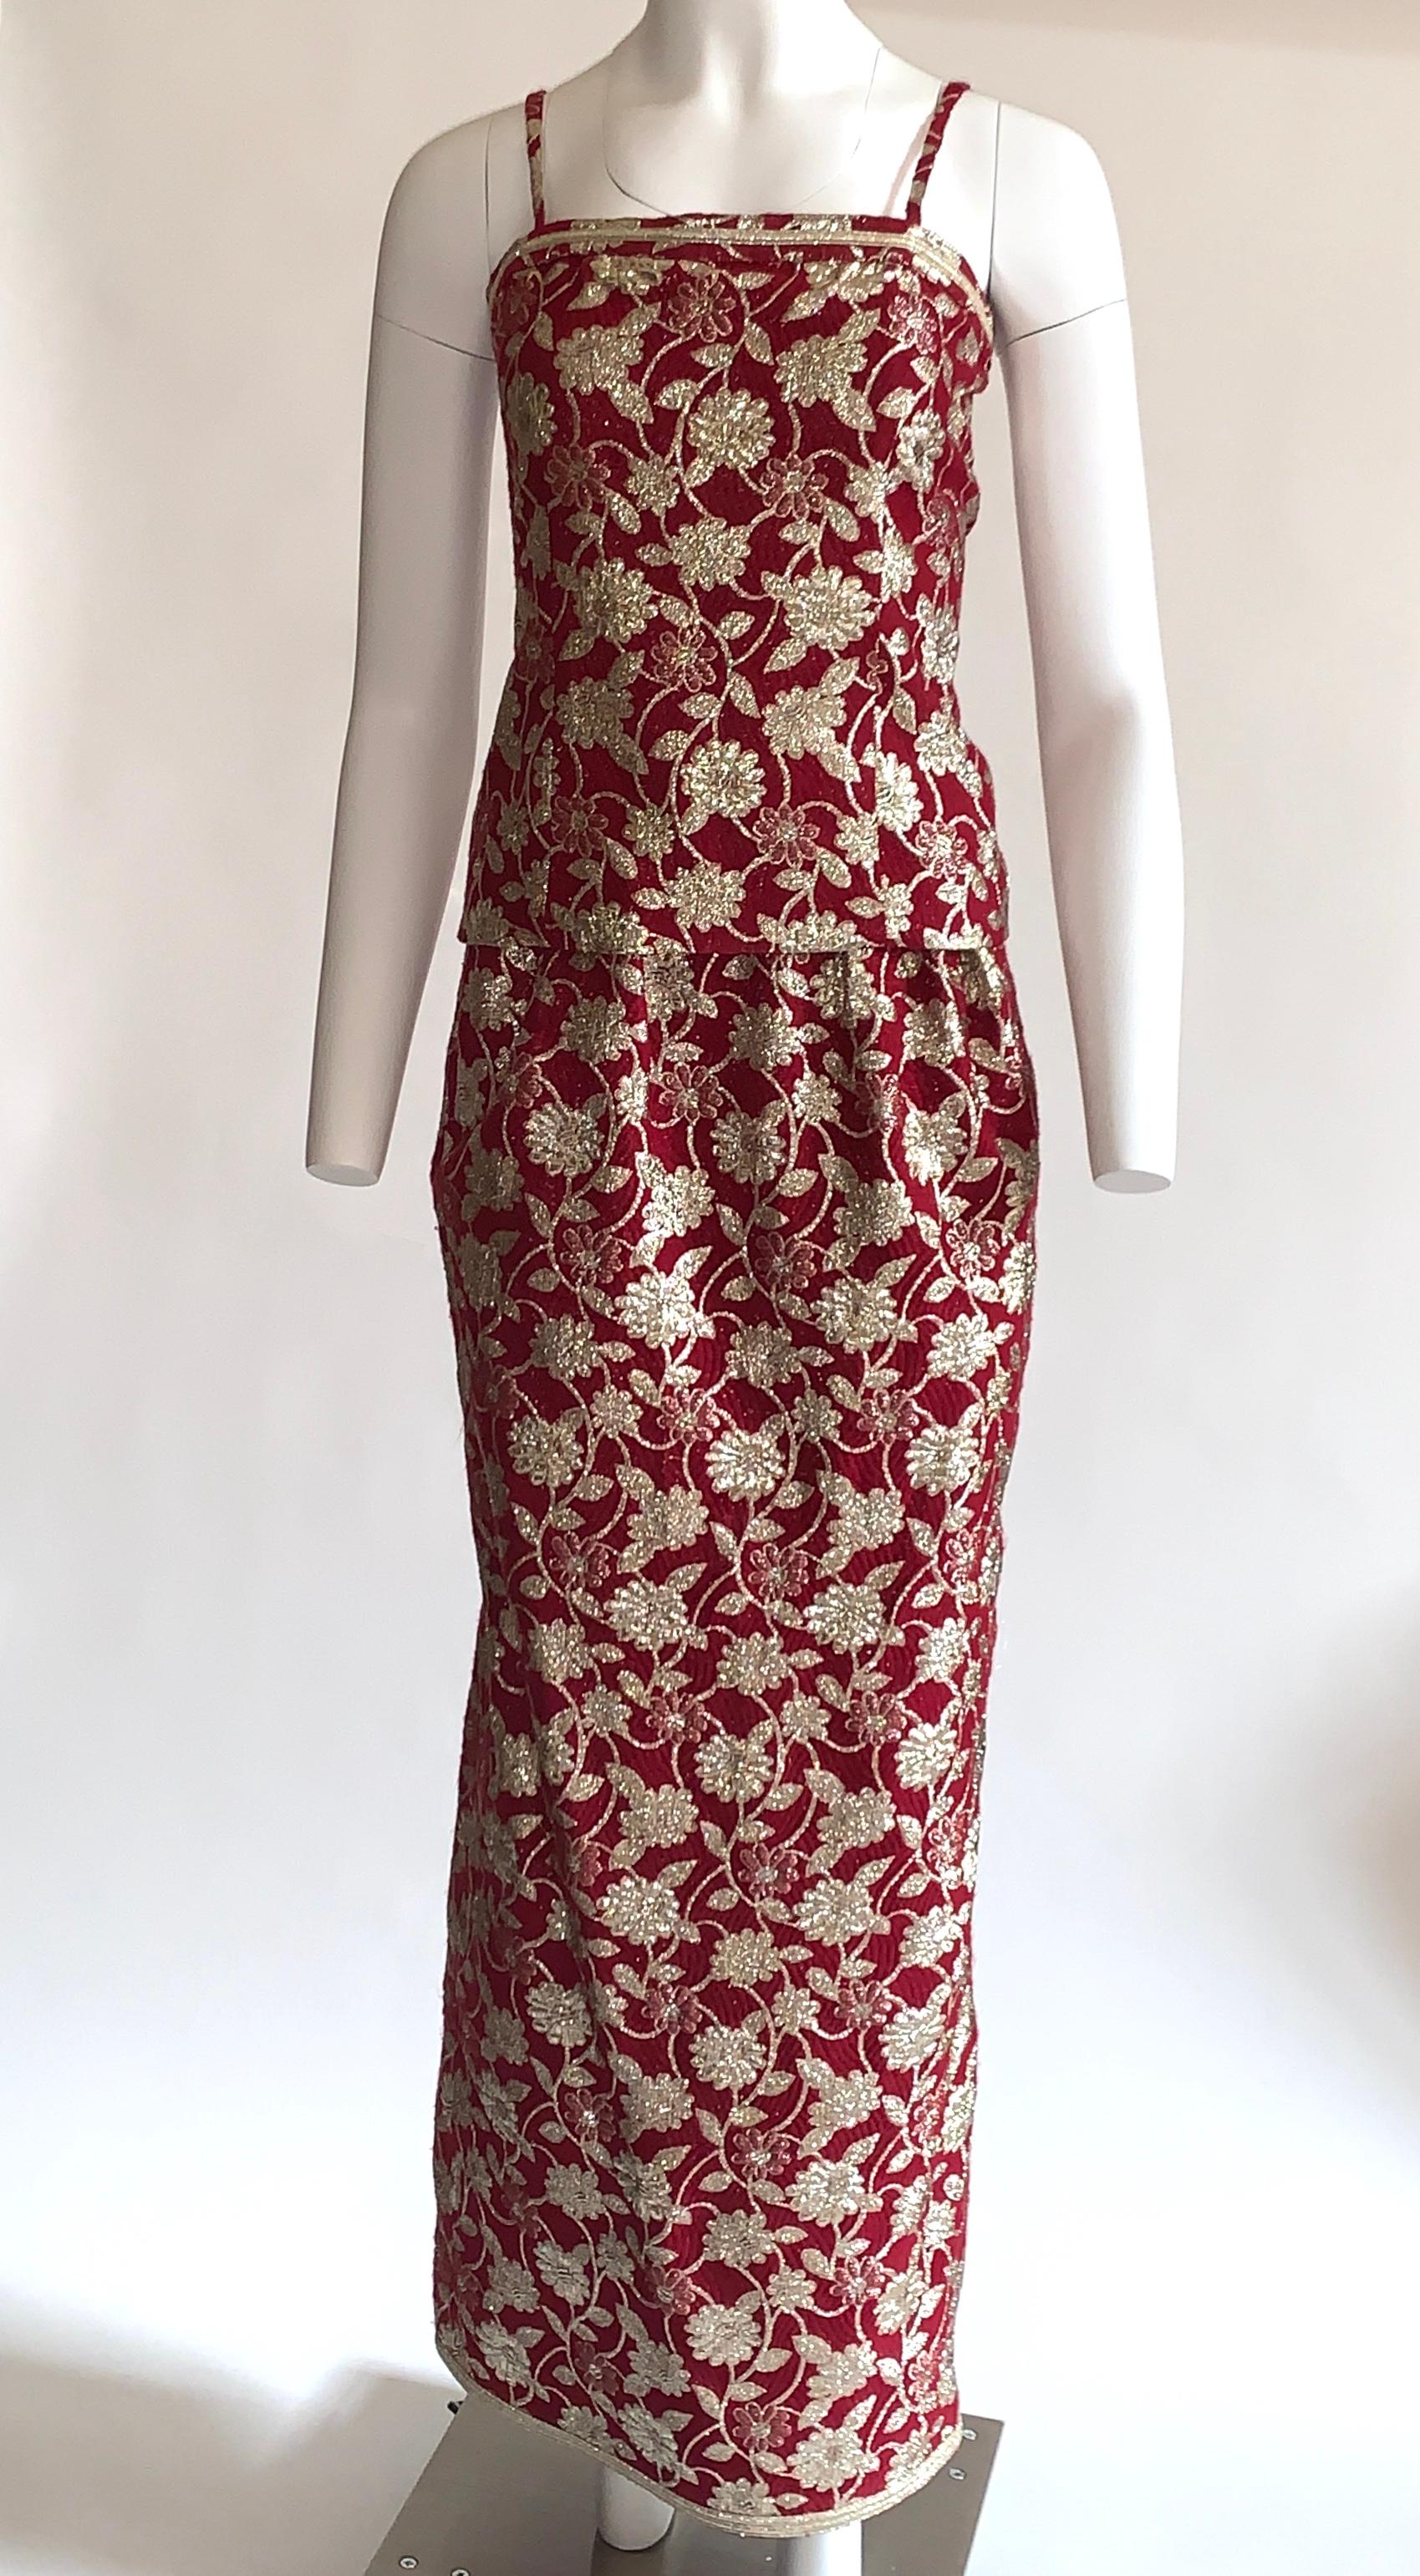 Adolfo 1970s Three Piece Red and Metallic Midi or Maxi Skirt and Tank Dress Set  In Good Condition For Sale In San Francisco, CA